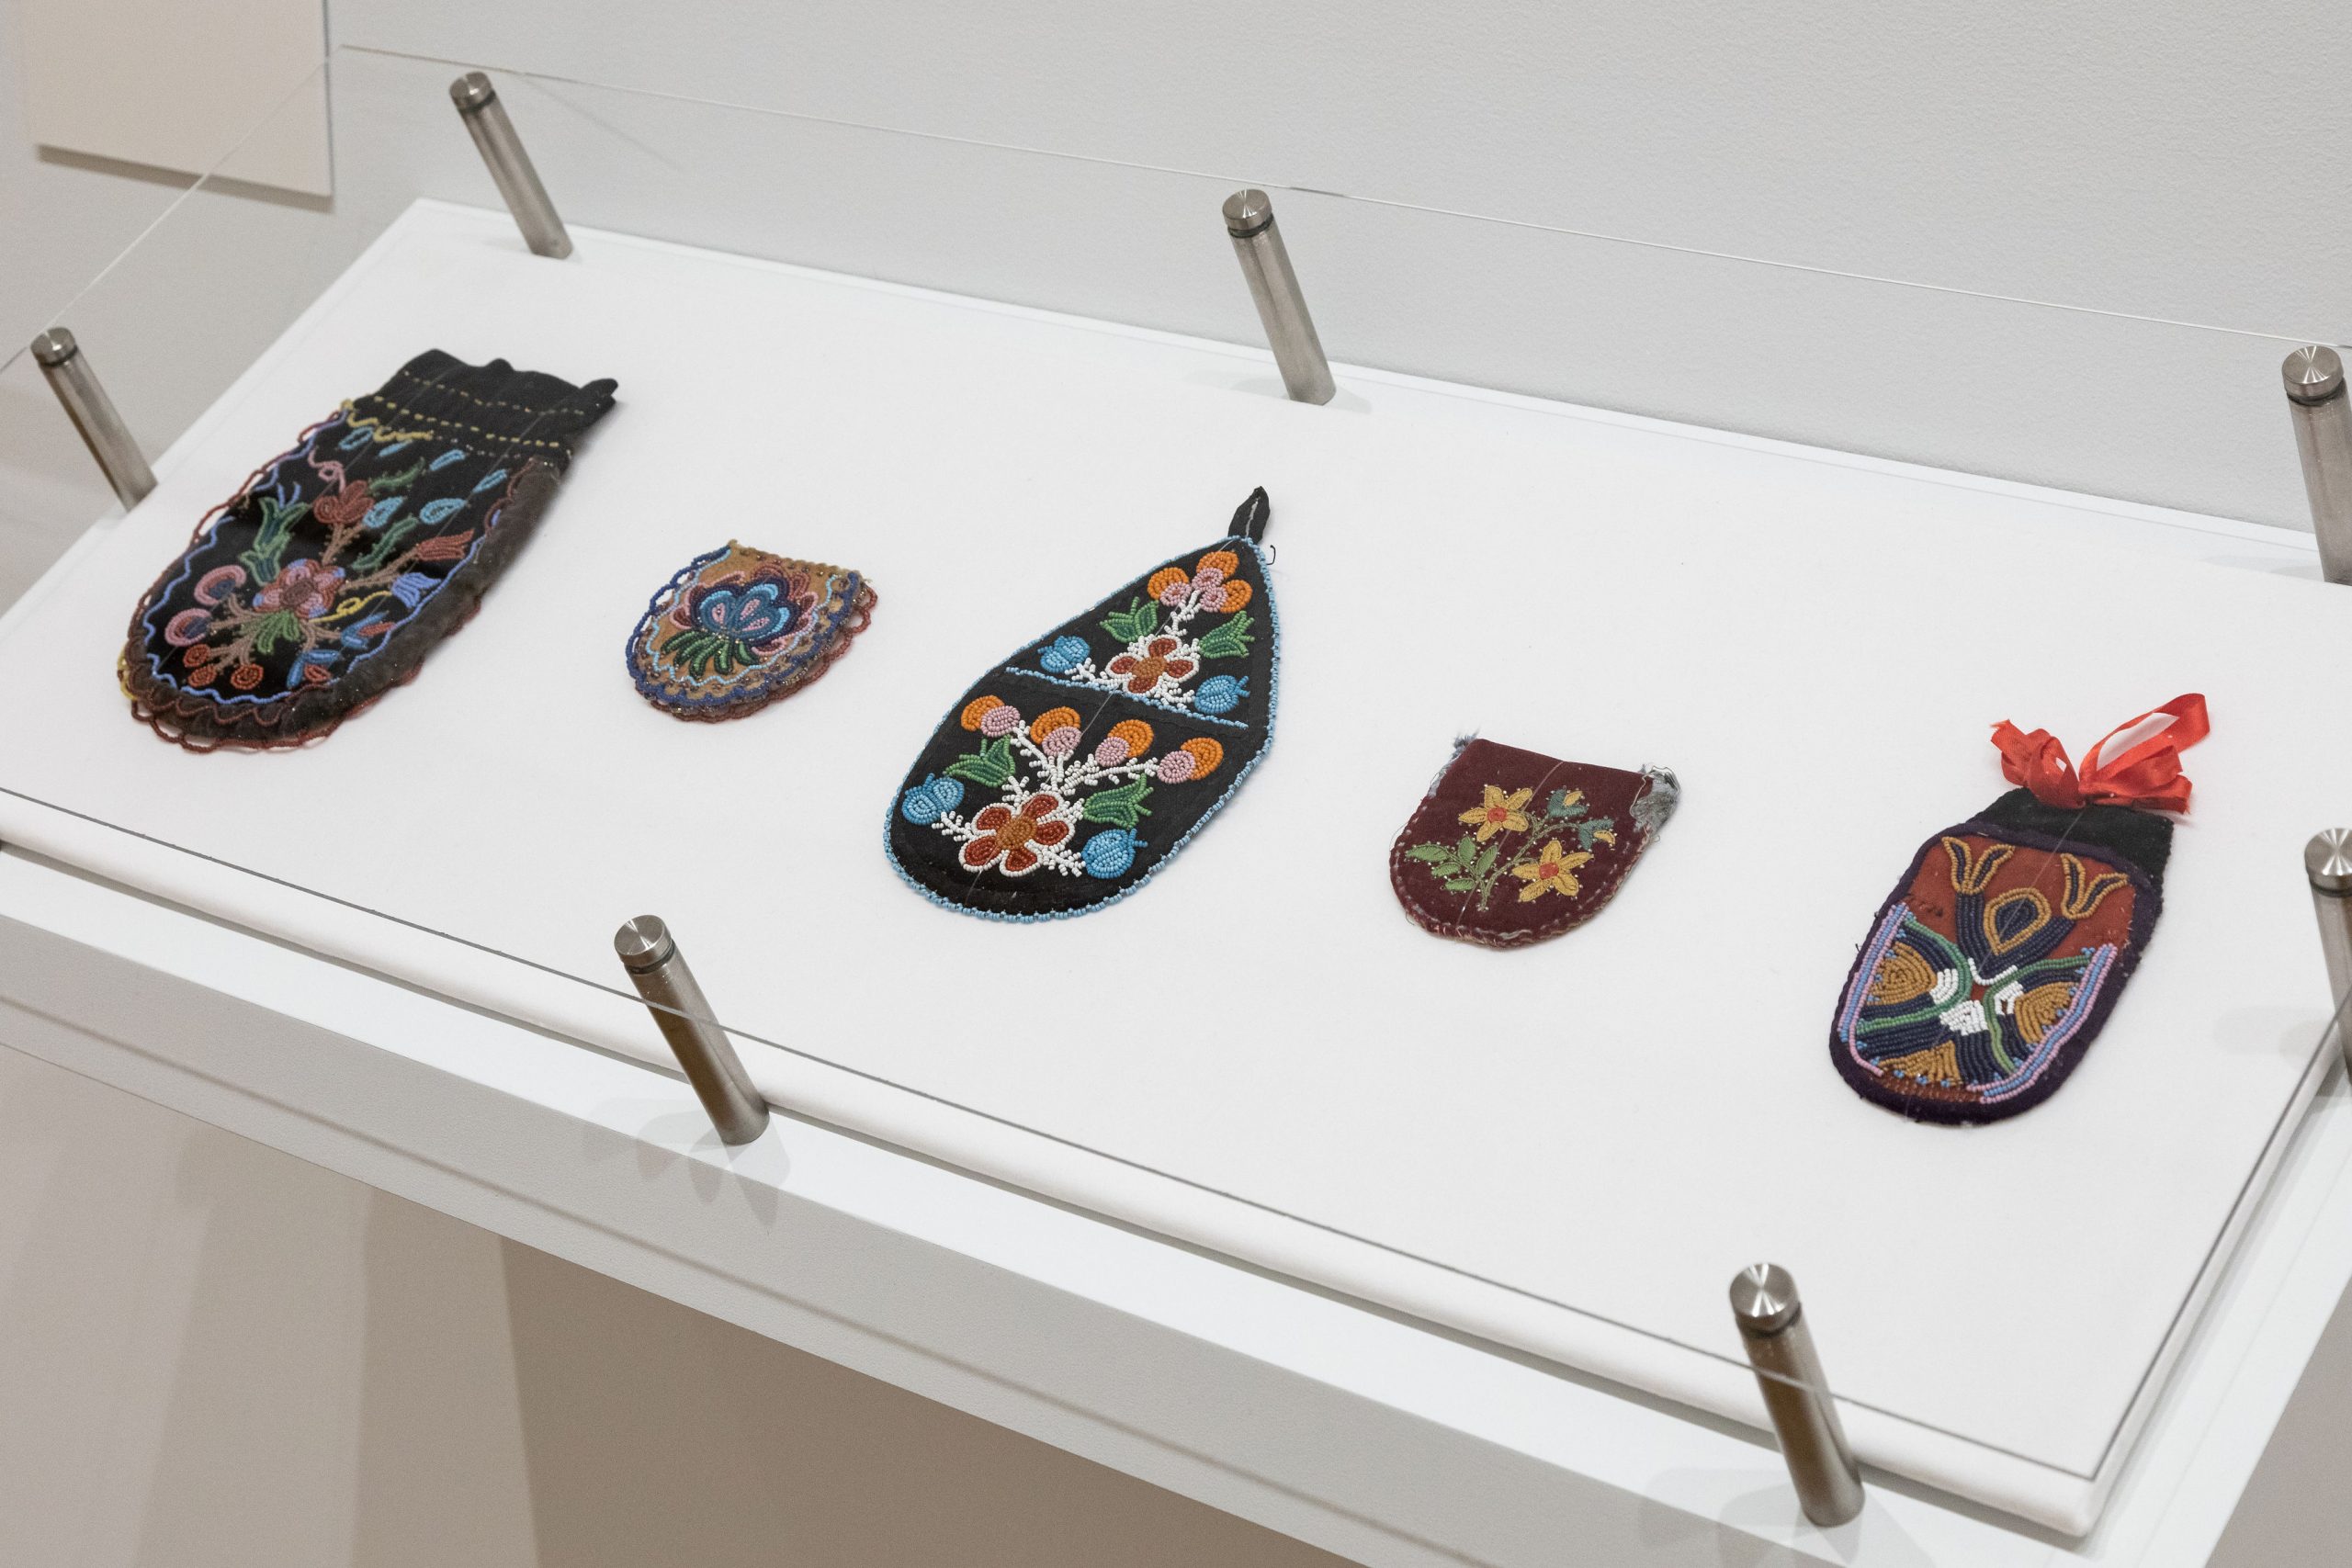 Installation view, Storied Objects: Métis Art in Relation. Remai Modern, 2022. Photo: Carey Shaw.